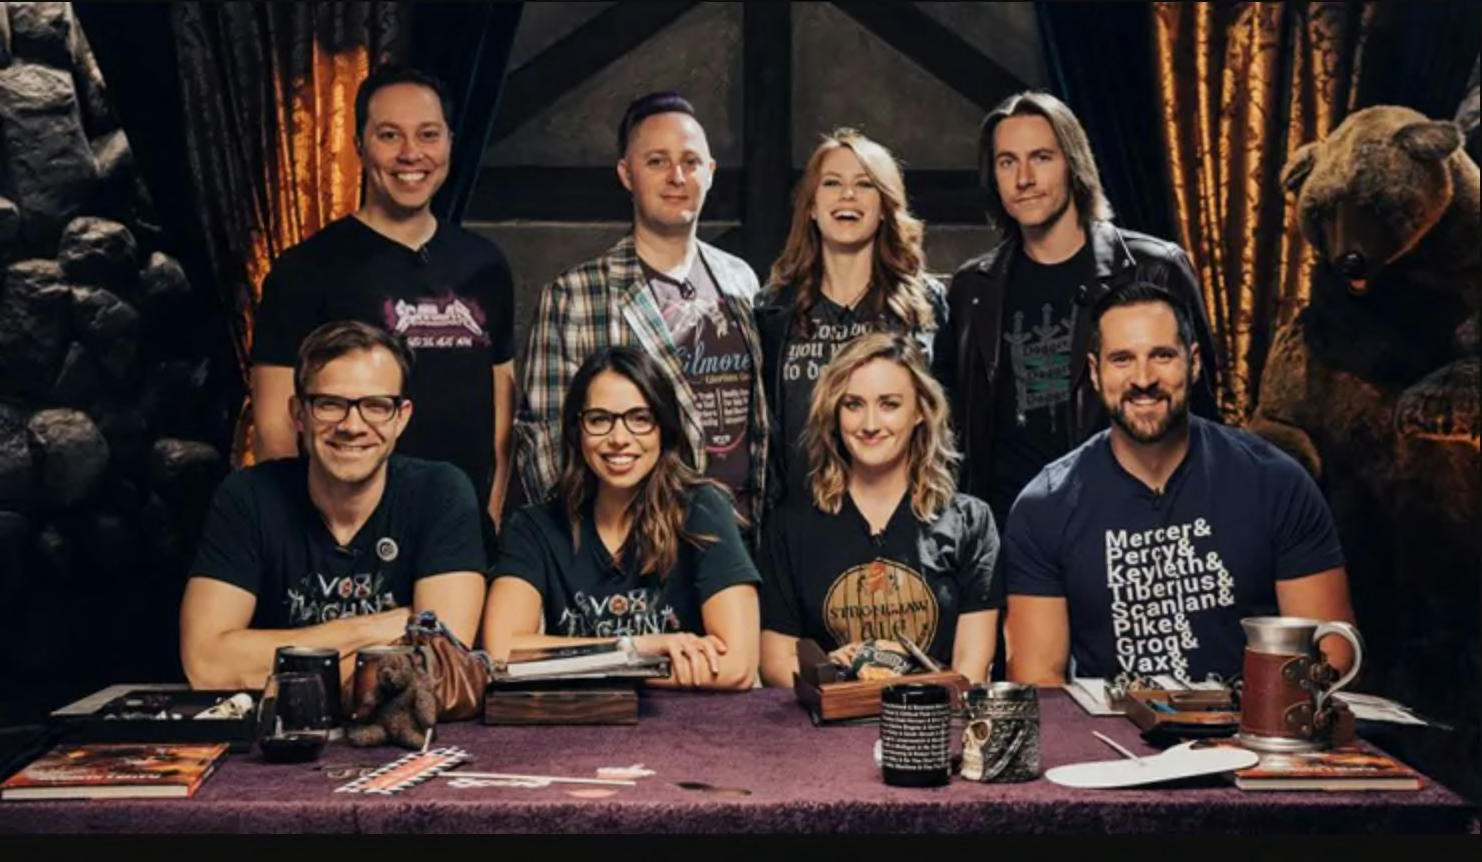 CR Media] Critical Role and Ashley Johnson's attorney provided me